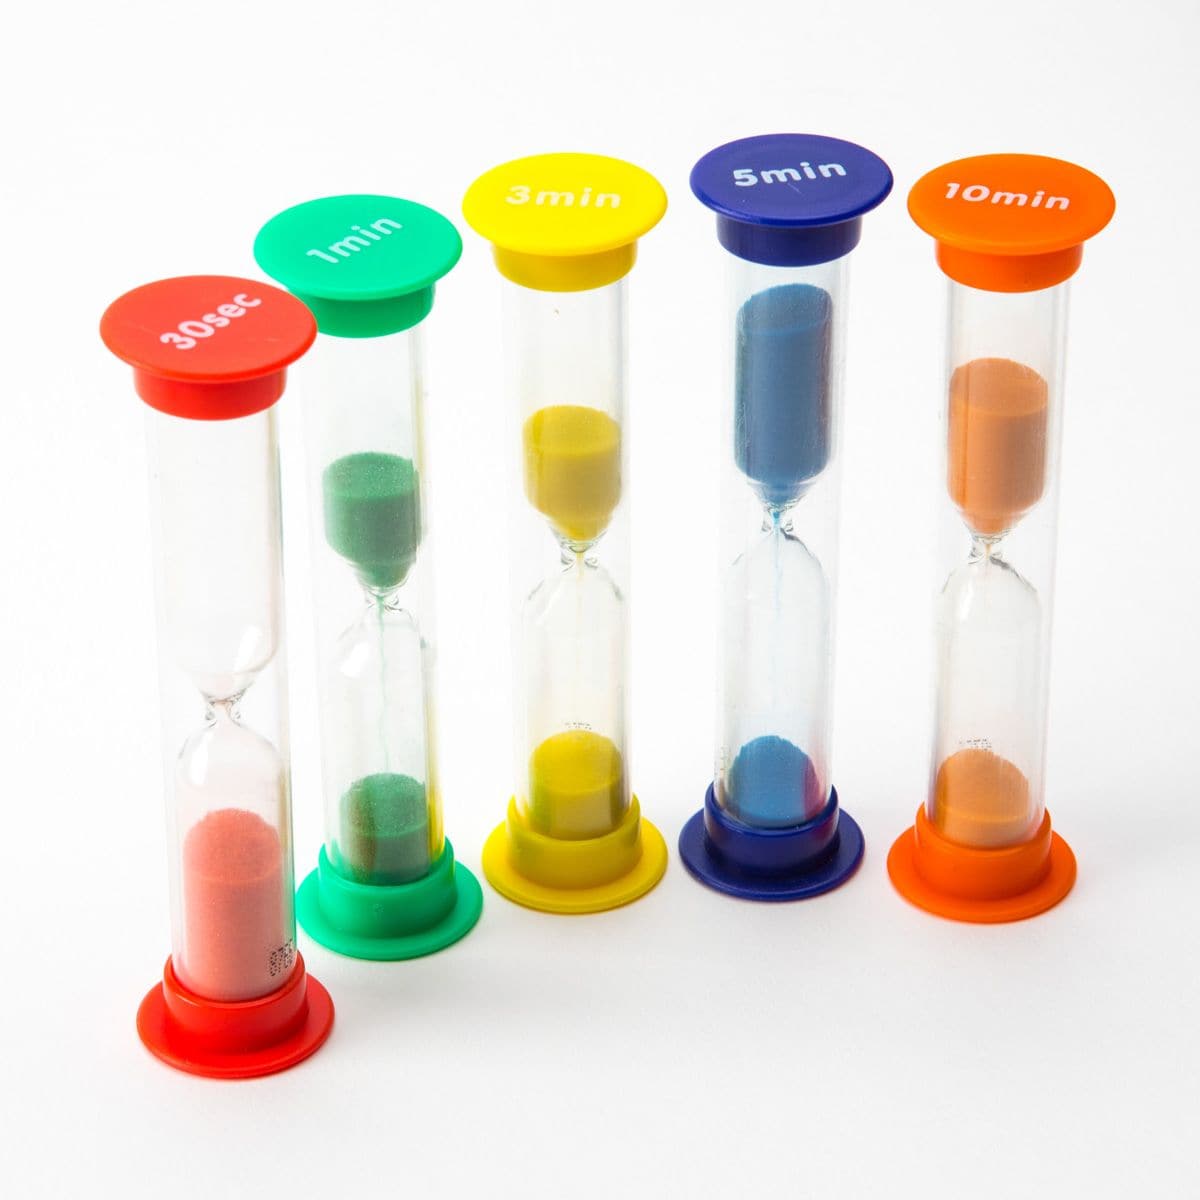 Sand timer Mixed Pack of 5, The Sand timer Mixed Pack of 5 contains robust colour coordinated pack of 5 midi sand timers with 30 seconds,1, and 2 minute,3 minute and 5 minute sand timers giving accurate interval times. The Sand timer Mixed Pack of 5 are perfect for use in games, accurate event timing and experiments and to set time challenges and boundaries for children. Sand timer Mixed Pack of 5 30 Second Sand Timer (Red) 1 Minute Sand Timer (Green) 3 Minute Sand Timer (Yellow) 5 Minute Sand Timer (Blue) 